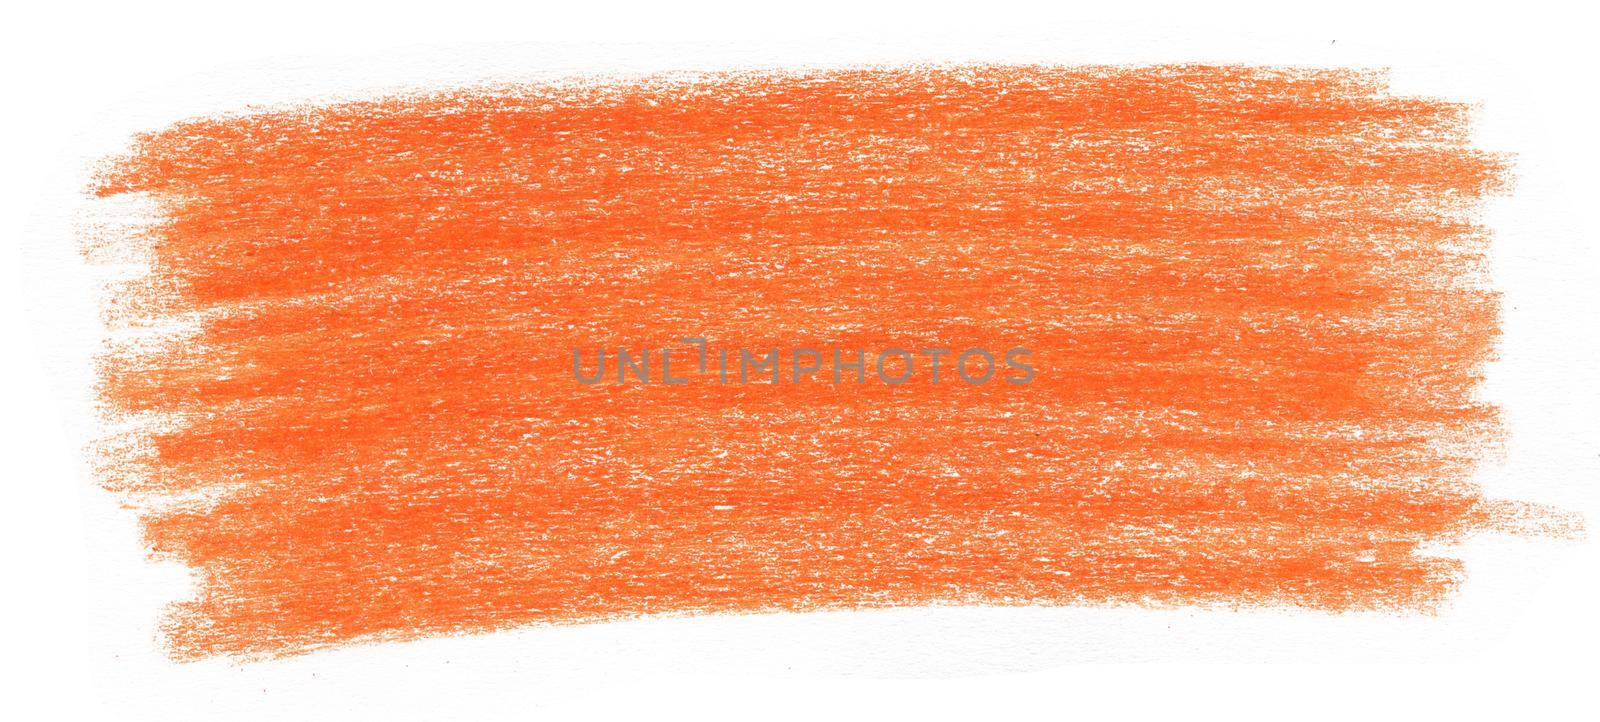 Orange Abstract Stain Drawn by Colored Pencil Isolated on White Background. Pastel Colored Spot for Decoration, Poster, Banner, Greeting Cards Design.